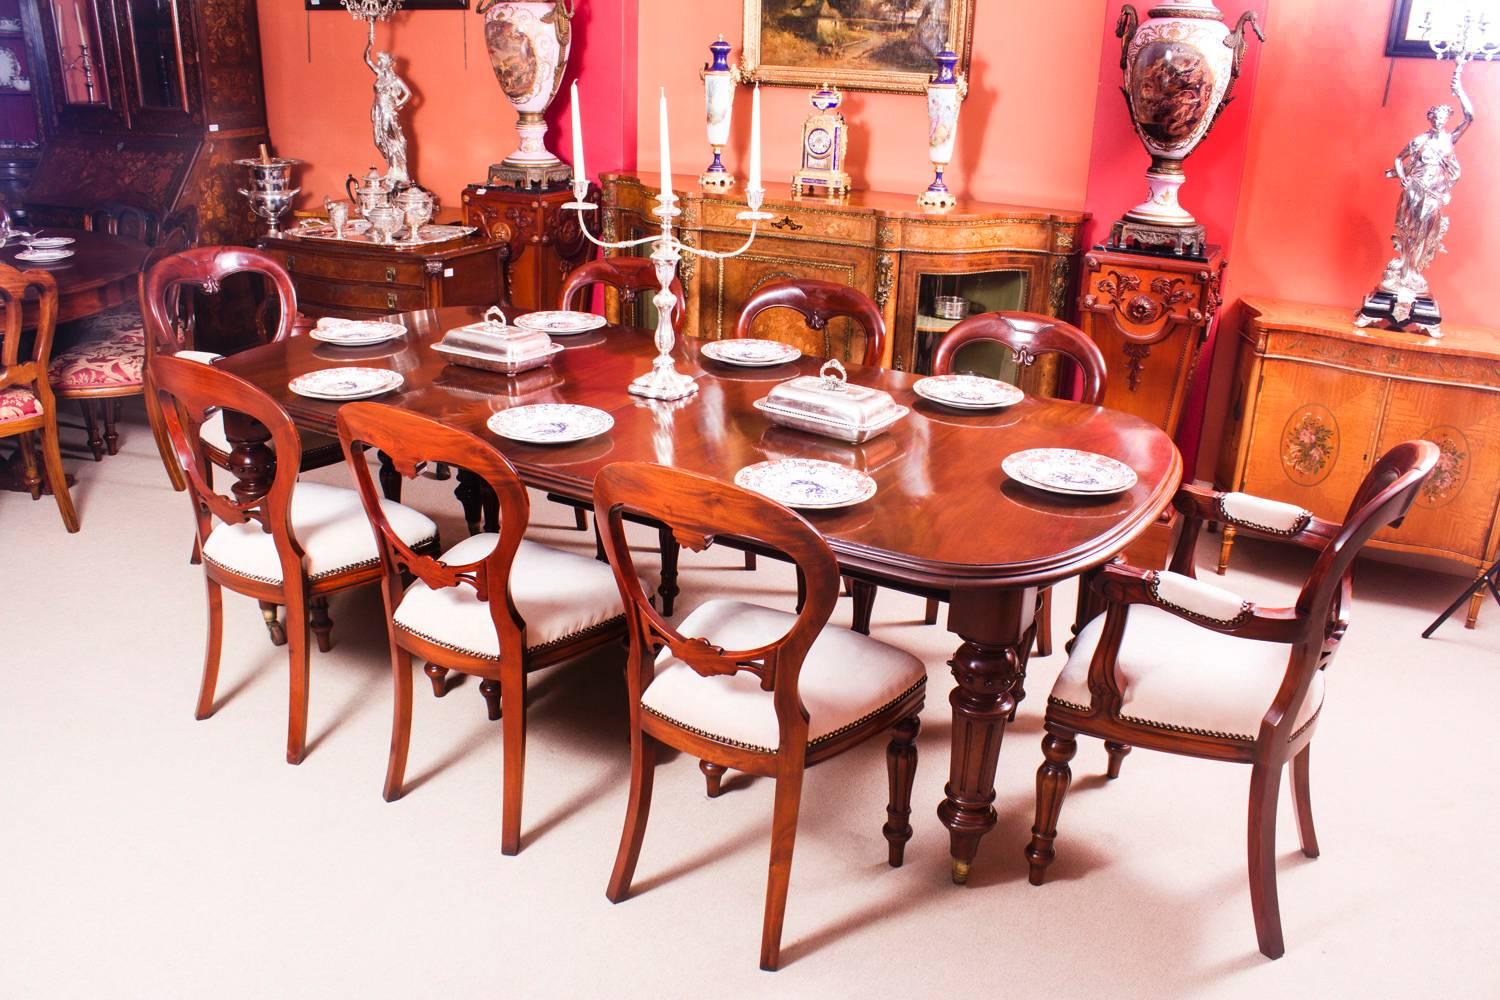 This is a beautiful antique dining set comprising an antique Victorian D-end dining table, circa 1860 in date and a set of eight Victorian style balloon back dining chairs.

This amazing table has two original leaves, can sit eight people in